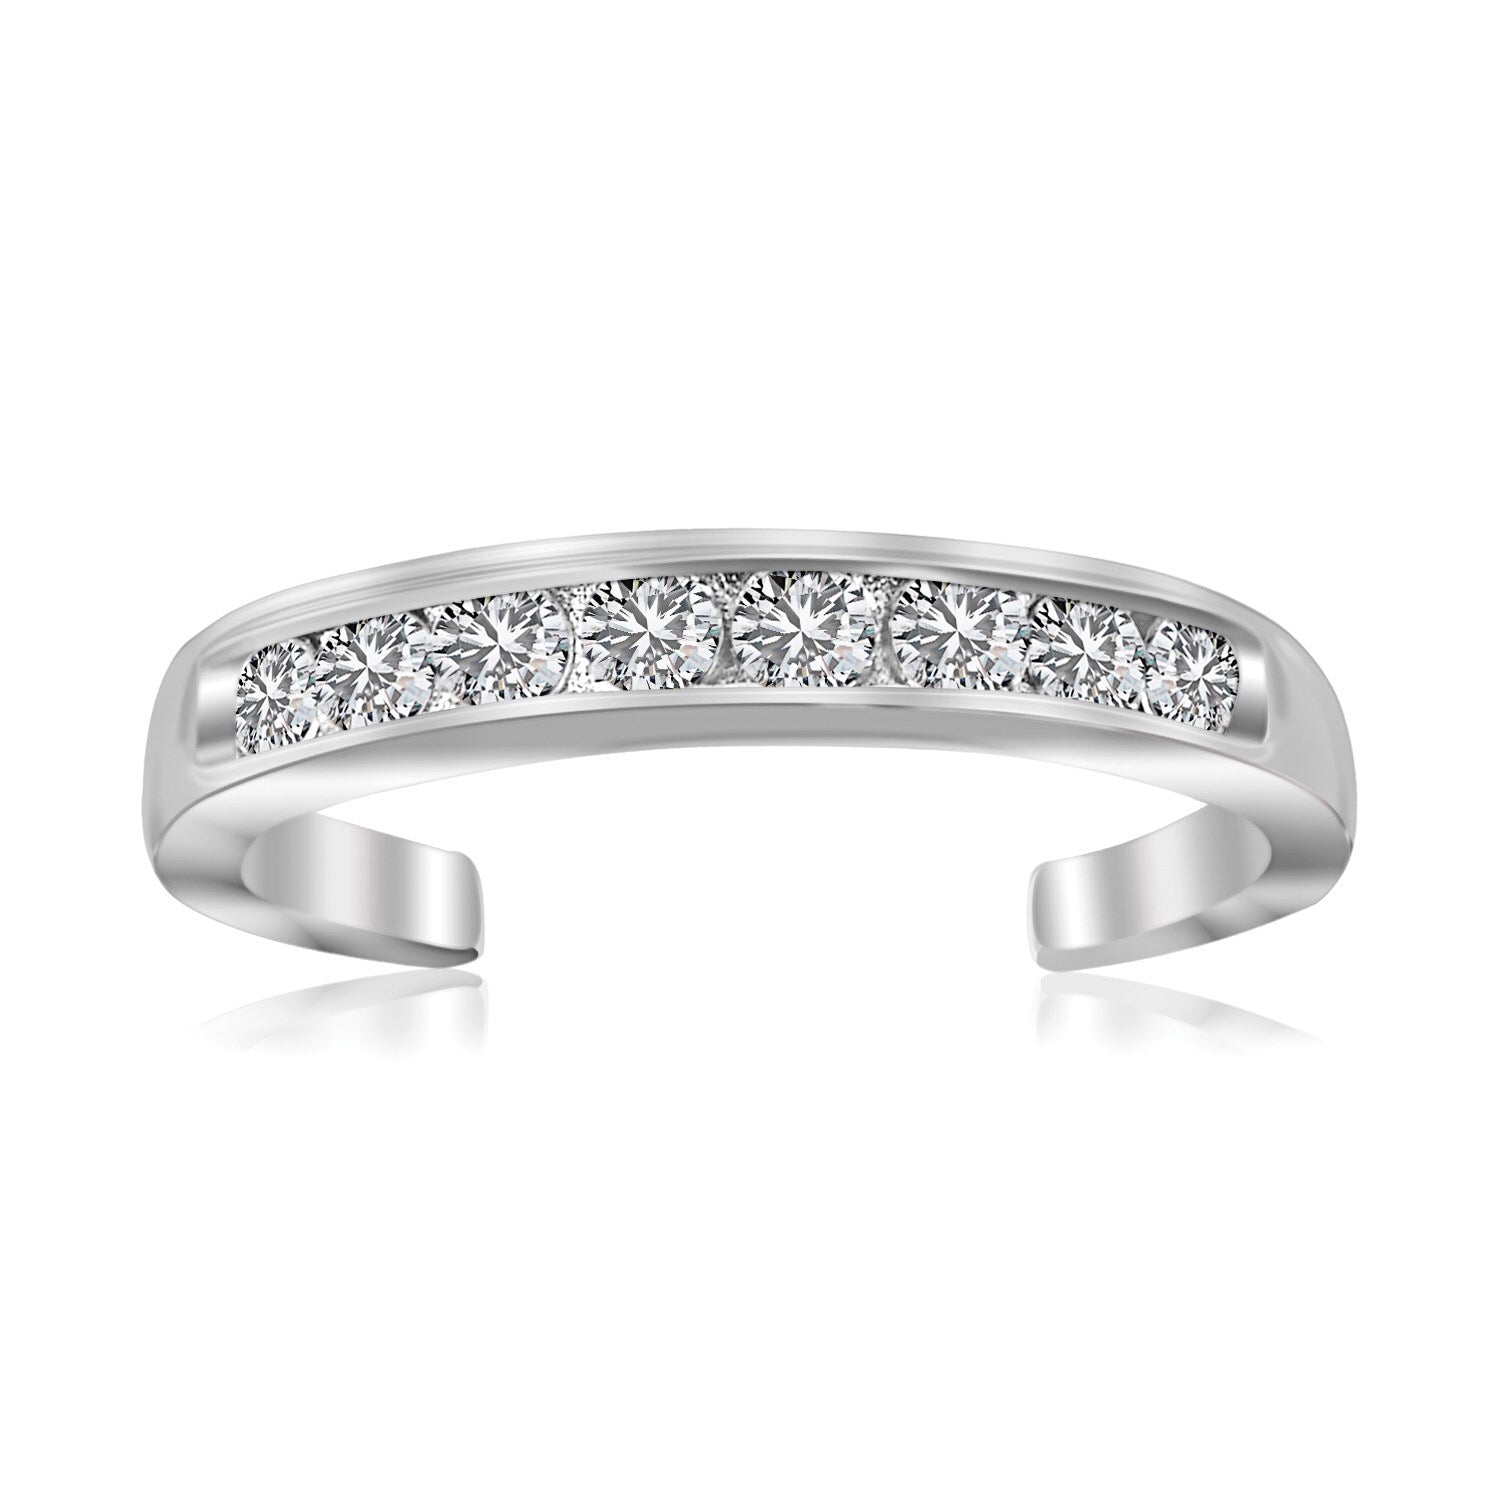 Sterling Silver Rhodium Finished Toe Ring with White Tone Cubic Zirconia Accents